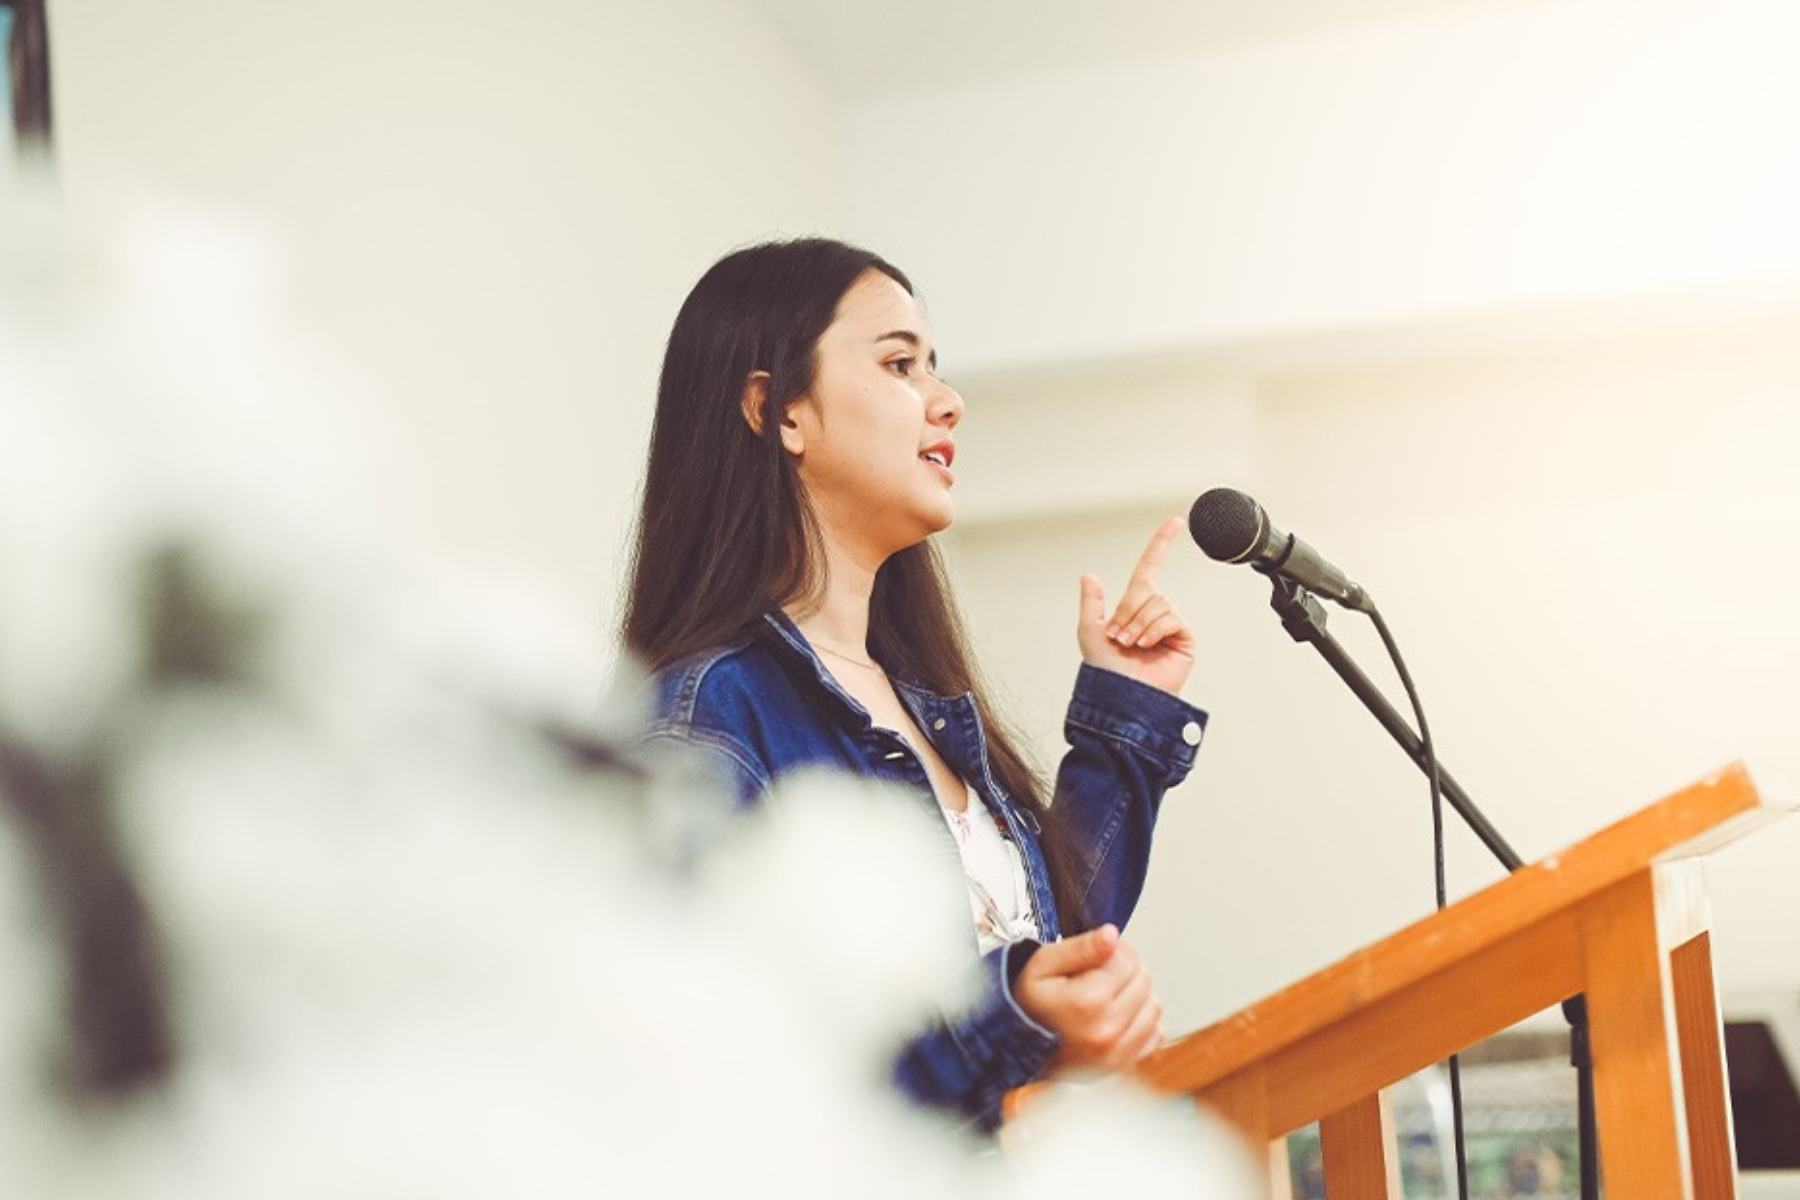 A young woman delivers a speech